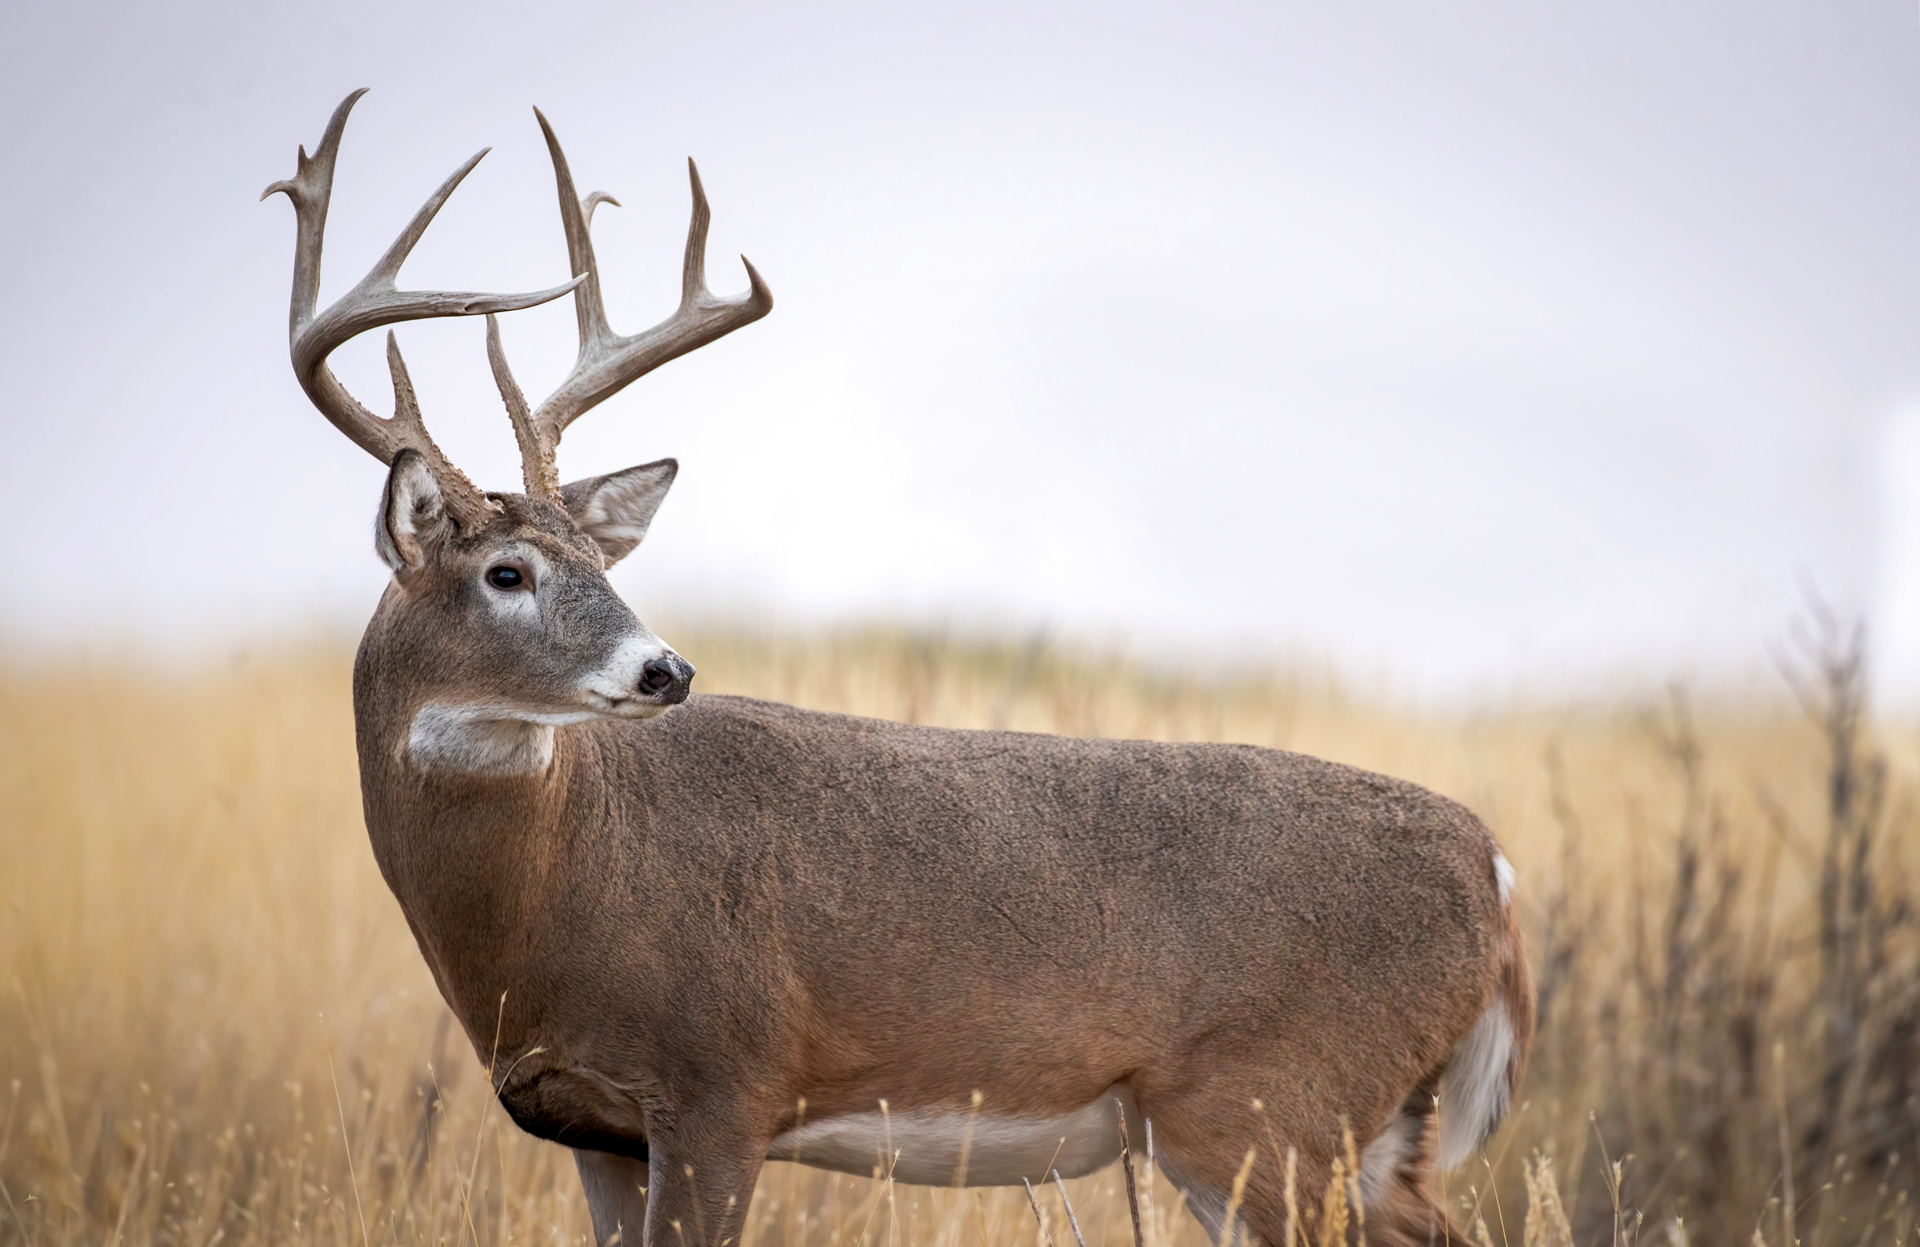 Large whitetail buck standing in a field